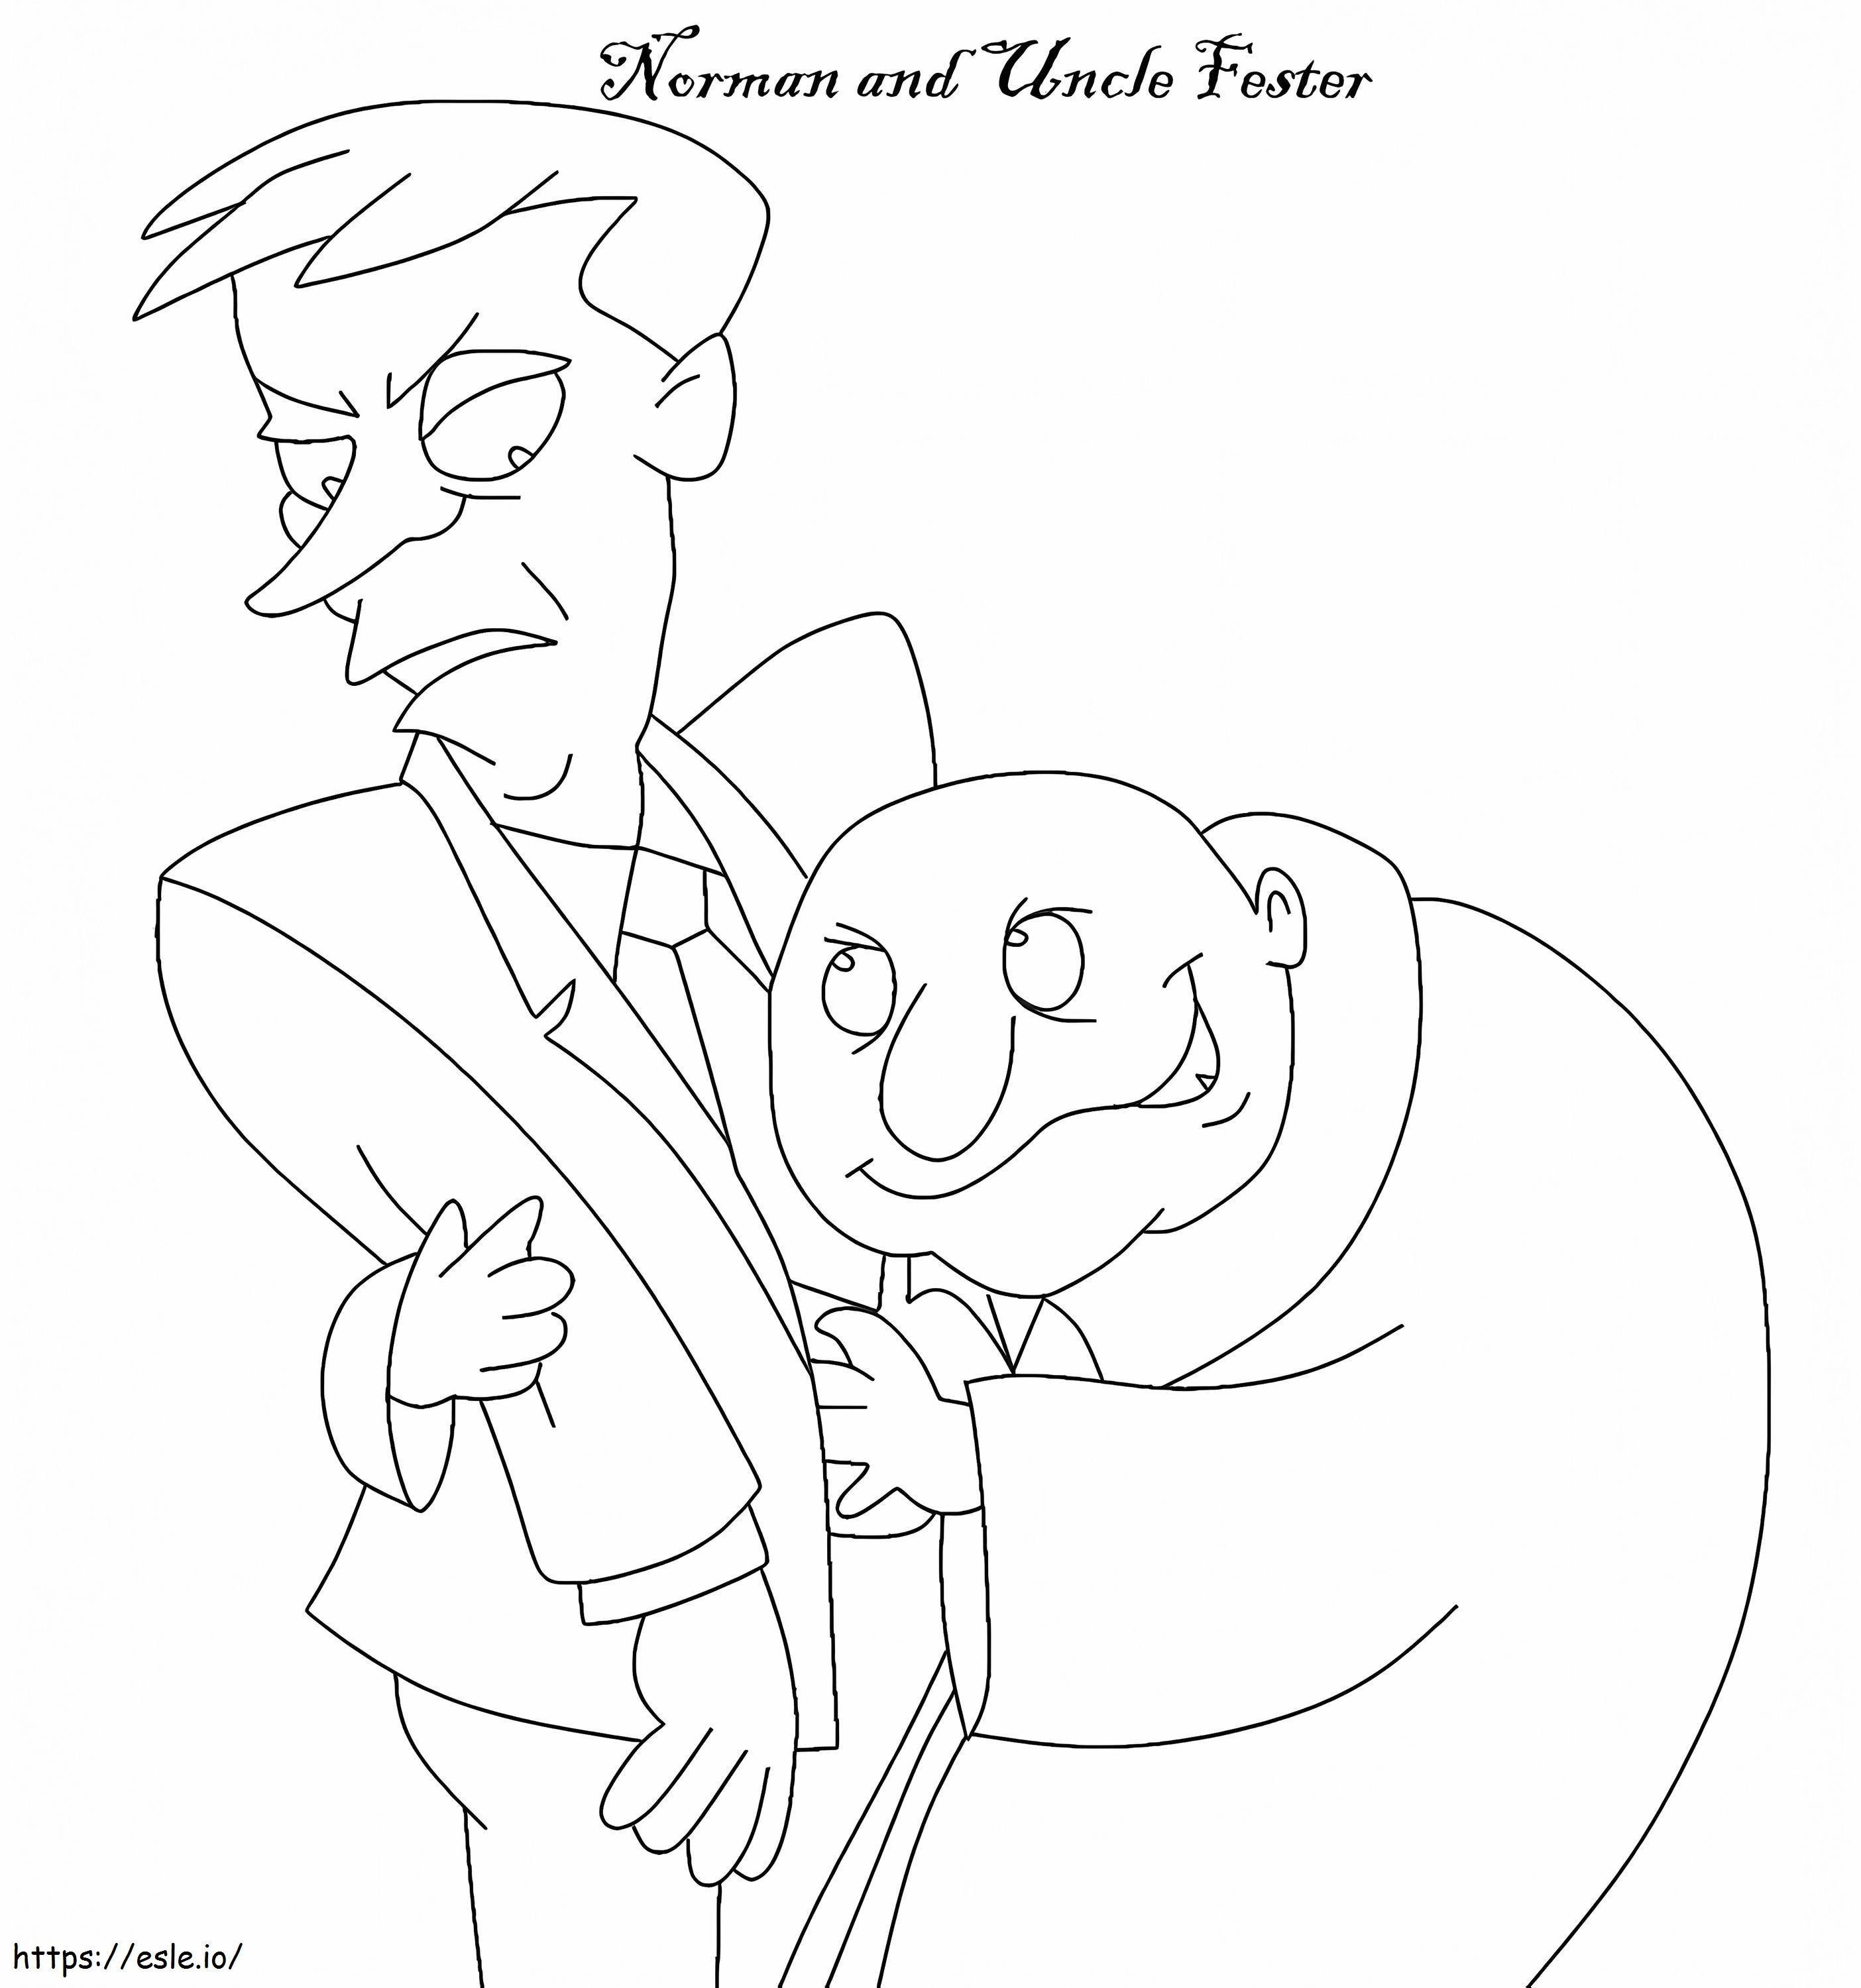 The Addams Family 1 coloring page